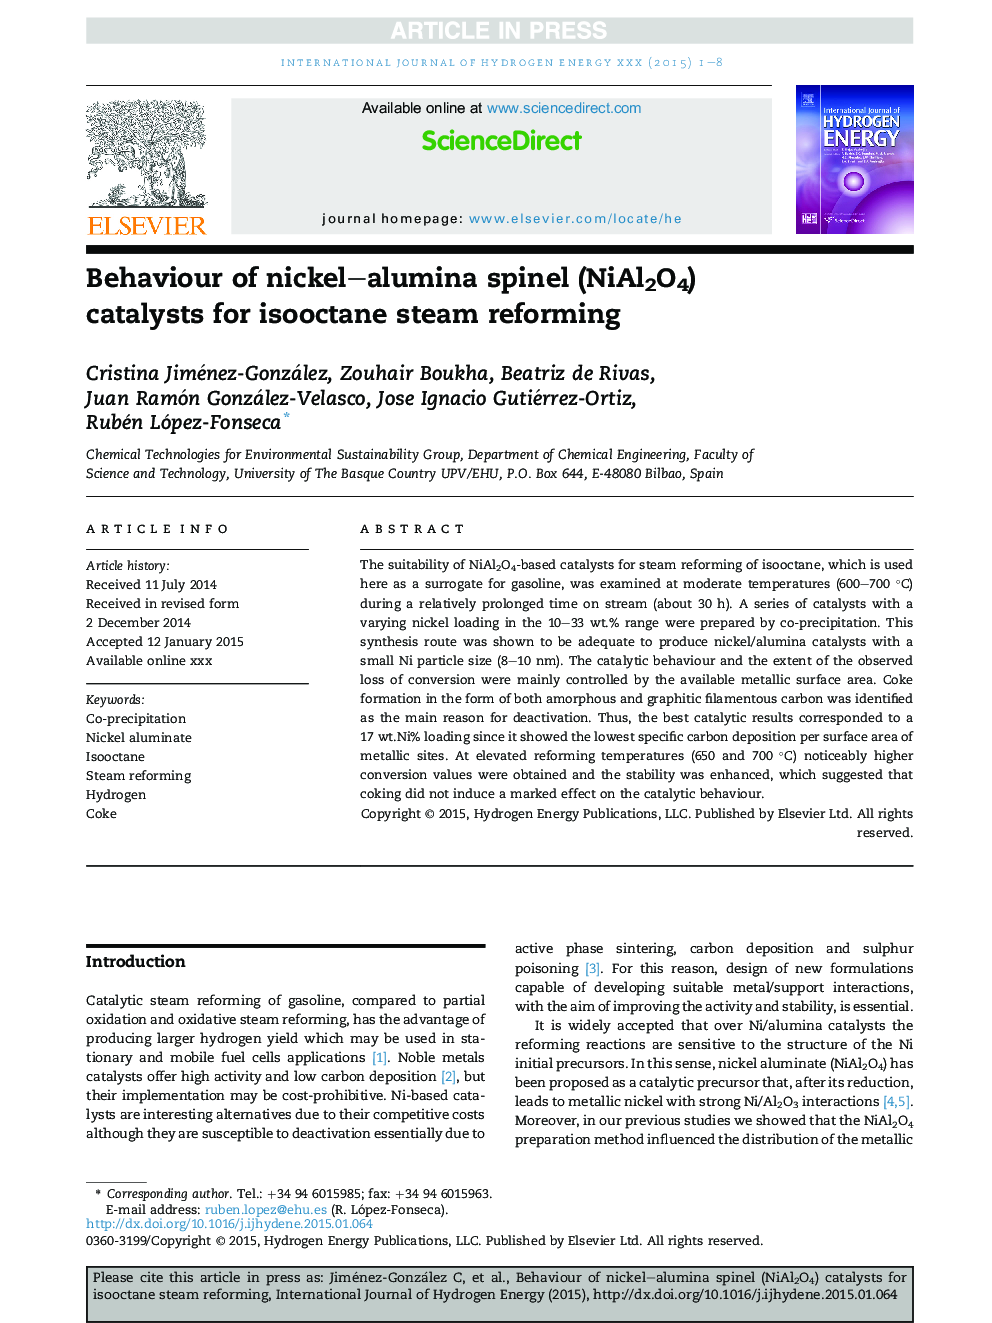 Behaviour of nickel-alumina spinel (NiAl2O4) catalysts for isooctane steam reforming